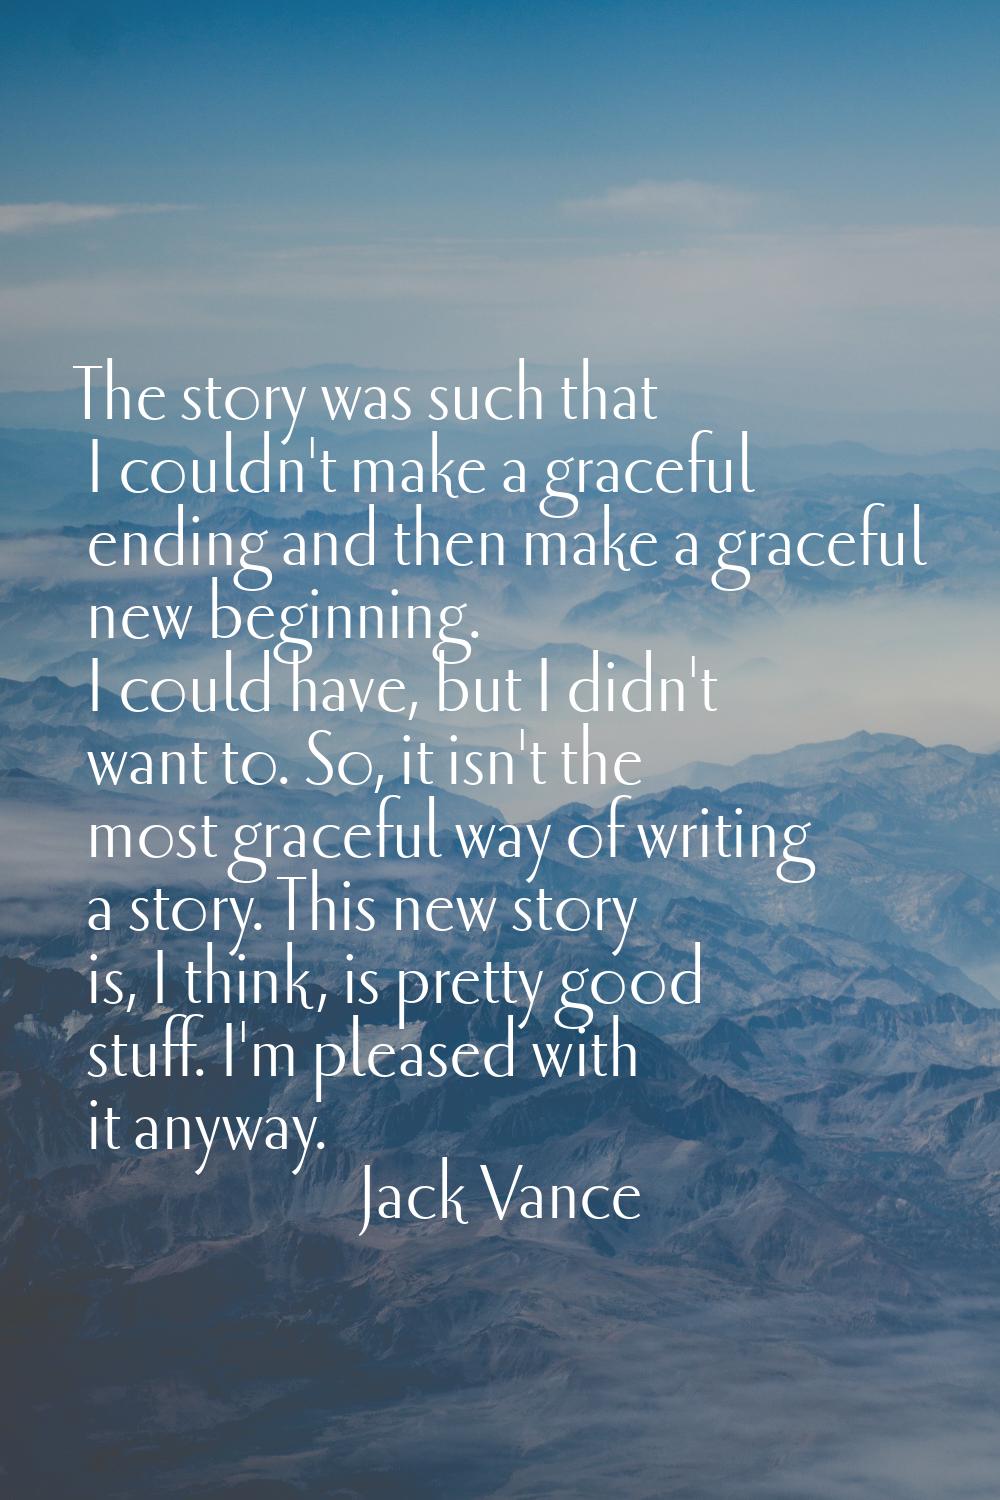 The story was such that I couldn't make a graceful ending and then make a graceful new beginning. I